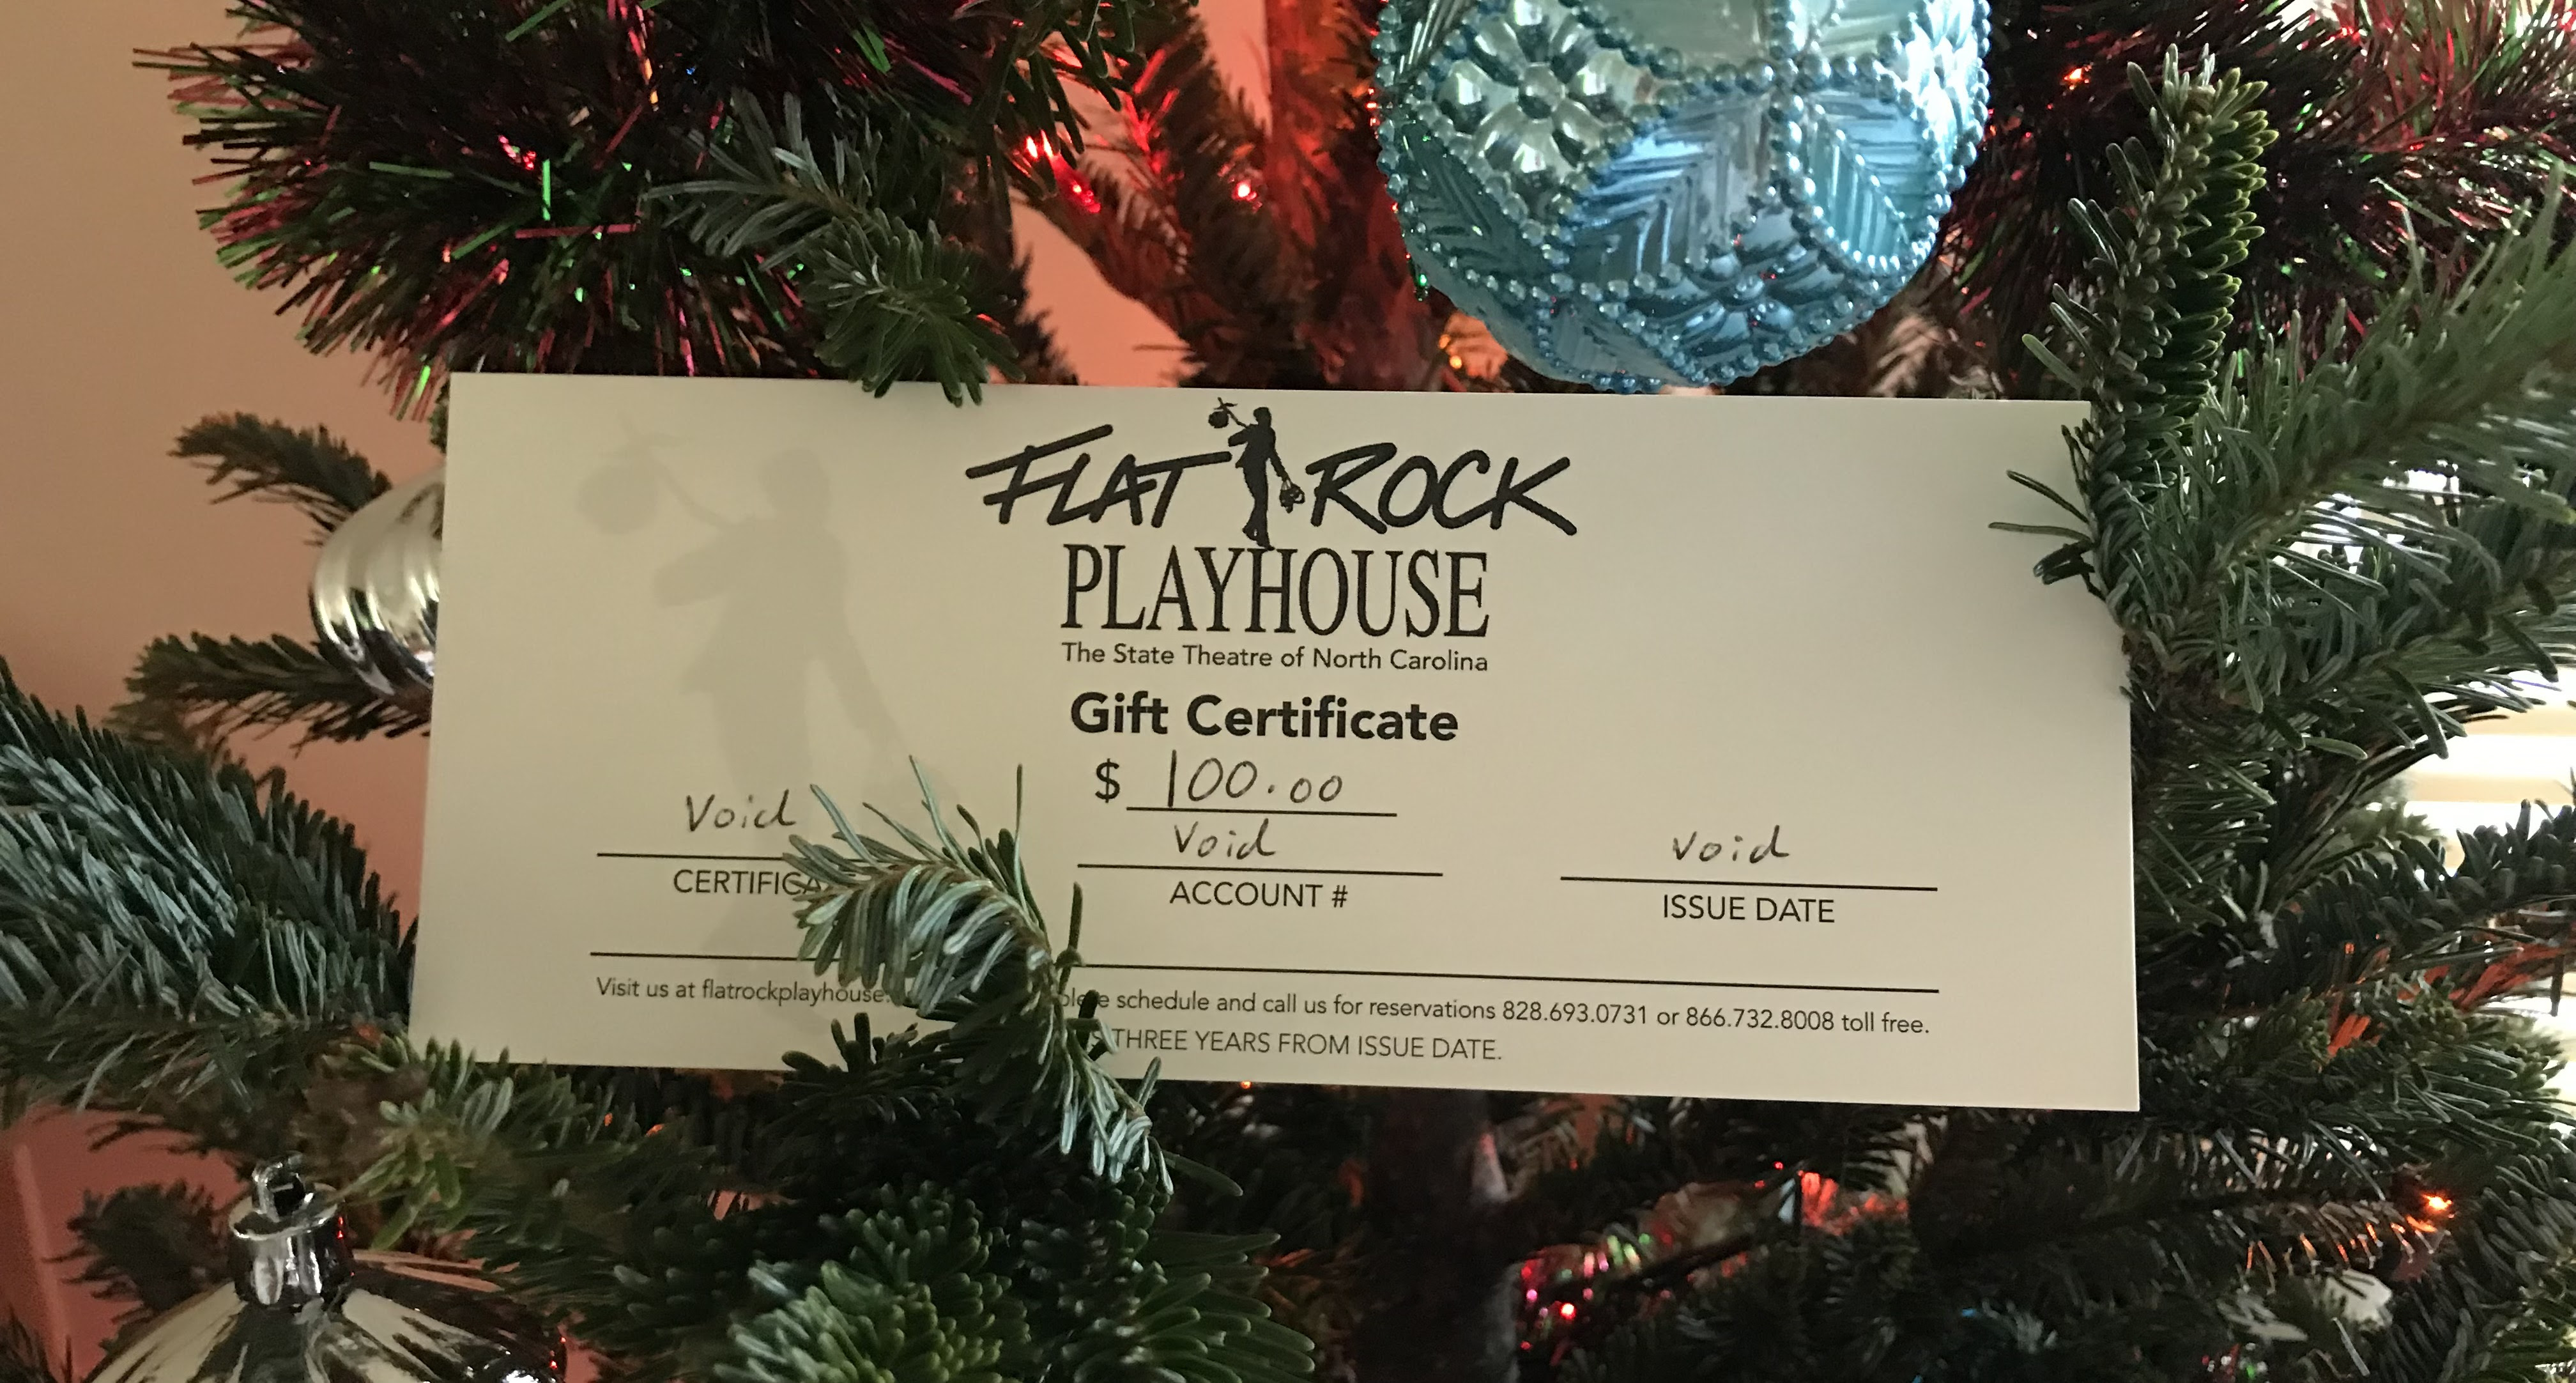 Flat Rock Playhouse Gift
                Certificate sits on a decorated Christmas tree